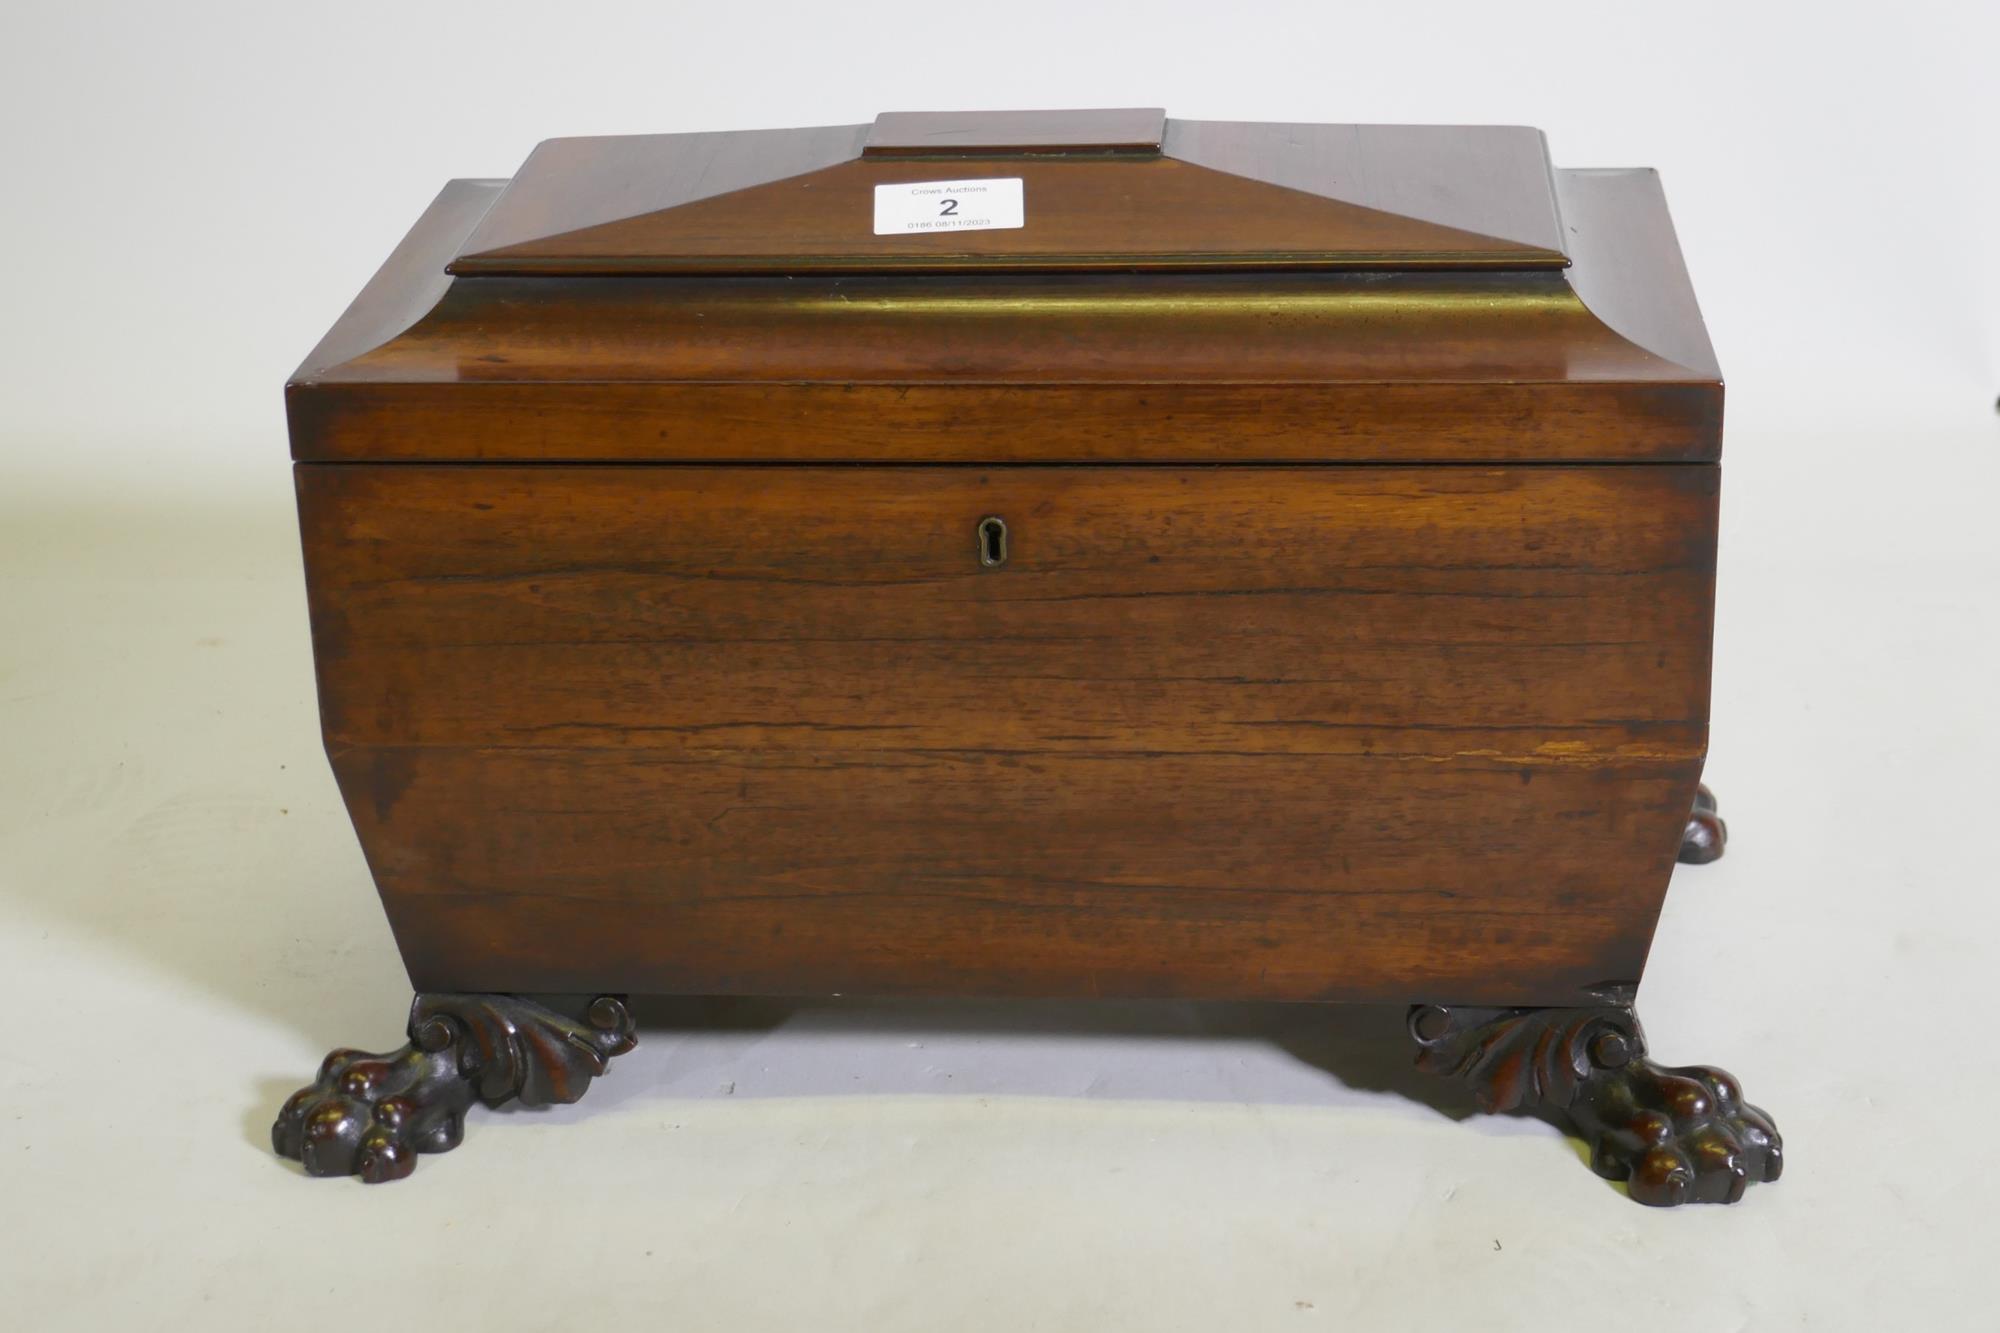 A good Regency mahogany two division tea caddy of sarcophagus shape, the interior with two lidded